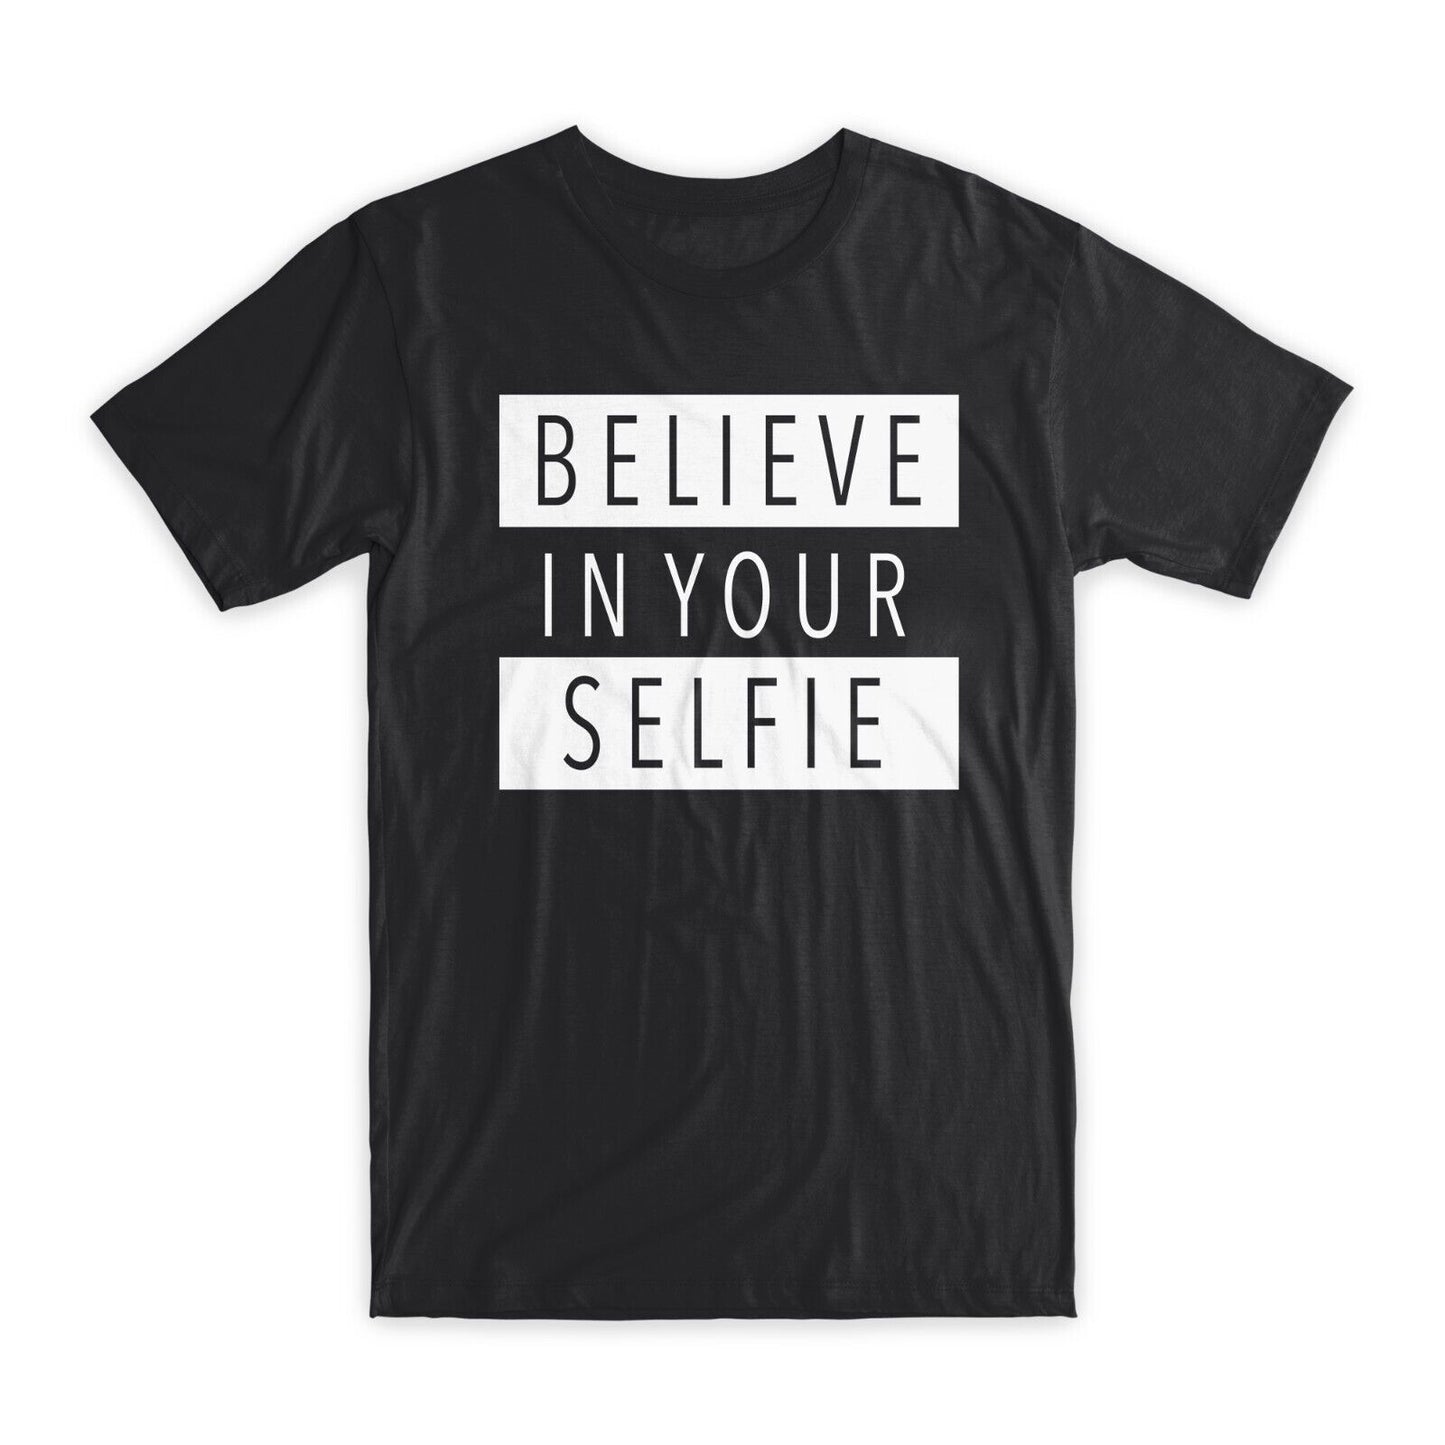 Believe in Your Selfie T-Shirt Premium Soft Cotton Crew Neck Funny Tees Gift NEW